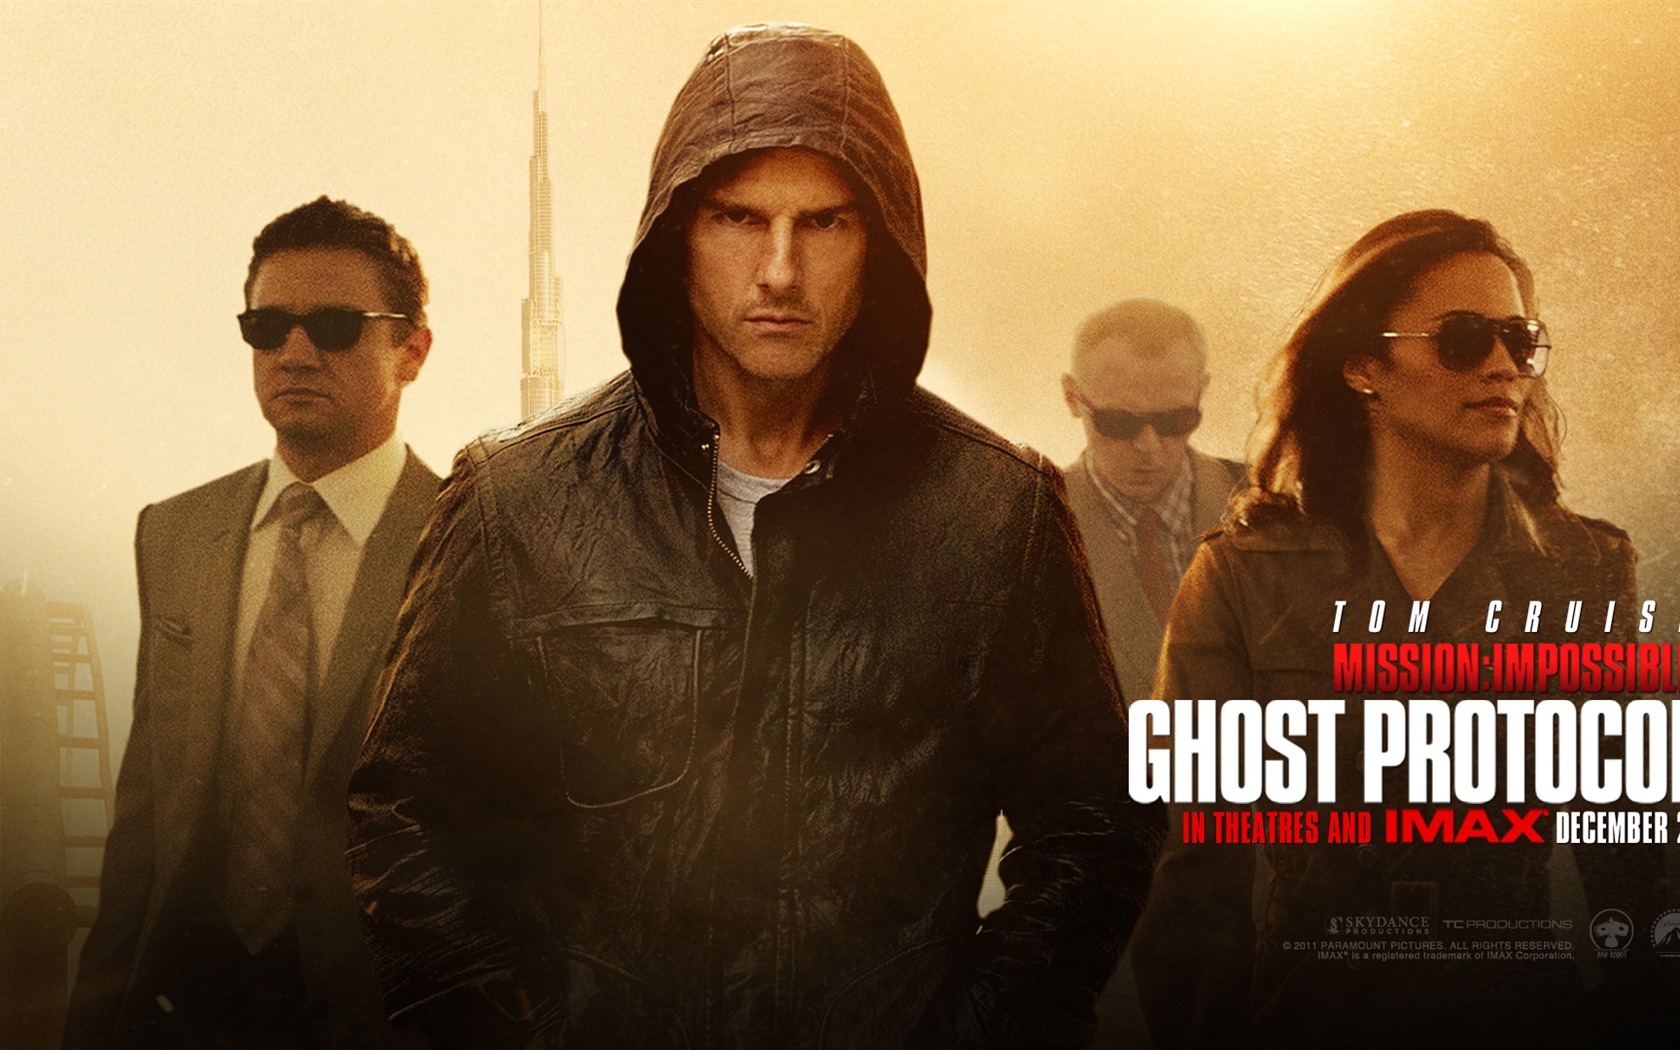 Mission: Impossible - Ghost Protocol 碟中谍4 高清壁纸1 - 1680x1050